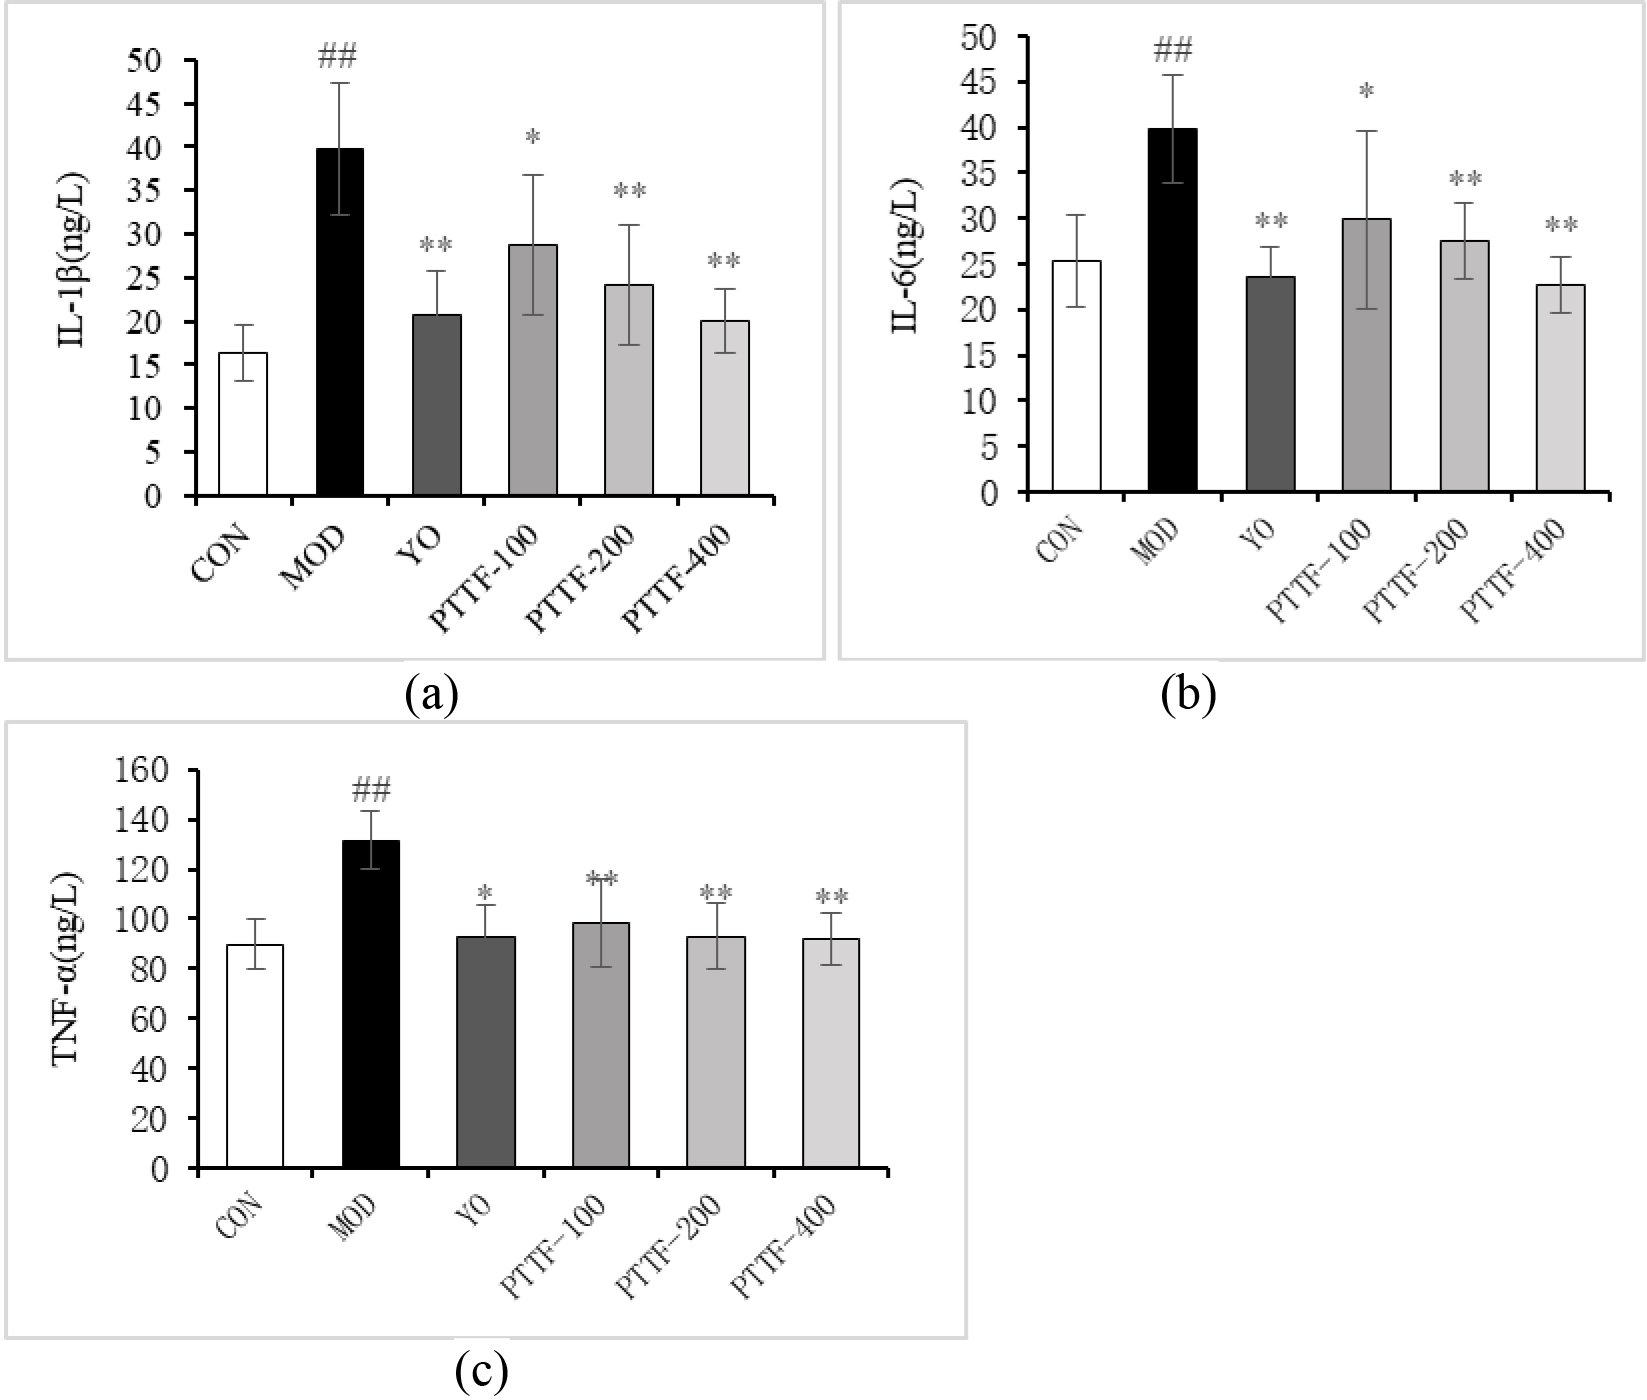 The Effects of PTTF on the serum levels of IL-1β, IL-6, and TNF-α in double-model gout. Note: CON: Blank group; MOD: Model group; YO: Colchicine group; PTTF-100: Prunus Tomentosa Total Flavones 100 mg/kg-Dose group; PTTF-200: Prunus Tomentosa Total Flavones 200 mg/kg-Dose group; PTTF-400: Prunus Tomentosa Total Flavones 400 mg/kg-Dose group. Compared to the blank group, #: P< 0.05; ##: P< 0.01. Compared to the model group, *: P< 0.05; **: P< 0.01.